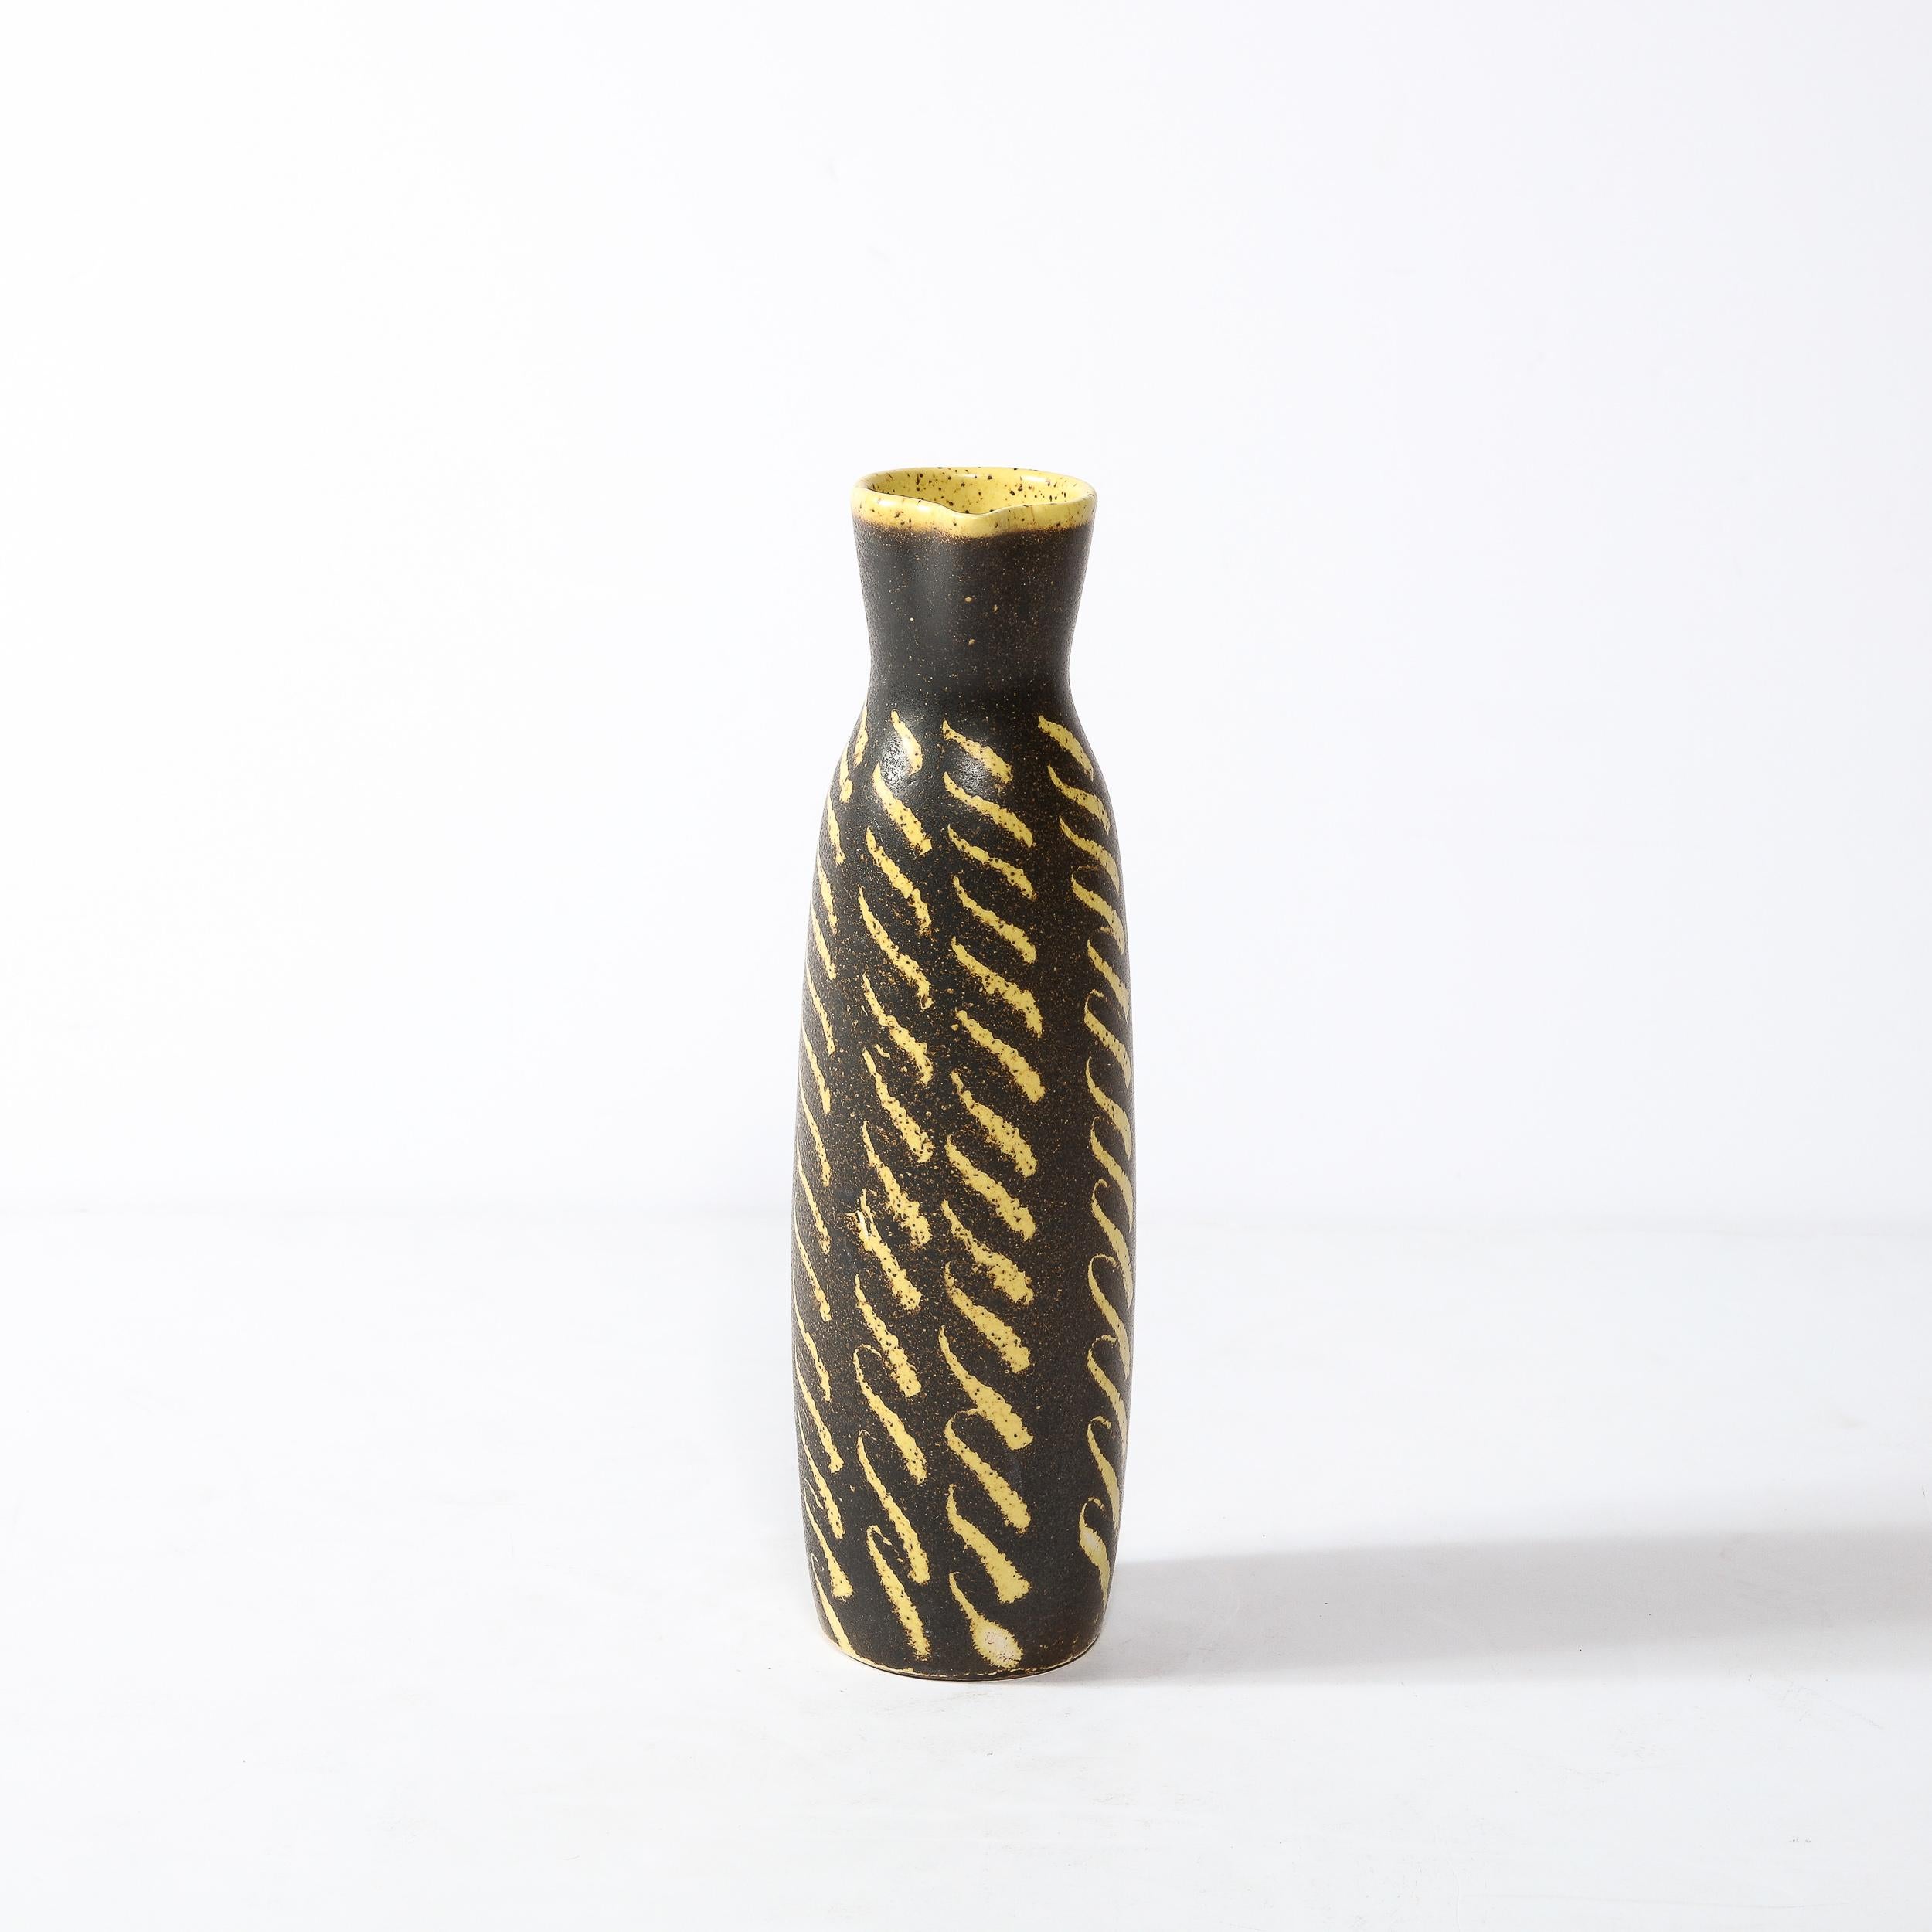 -This boldly patterned Mid-Century Modernist Ceramic Vase Originates from the United States, Circa 1960. The body of the vase curves gently outwards with a hand-brushed patterning in  yellow and burnt umber glaze creating vibrating movement and